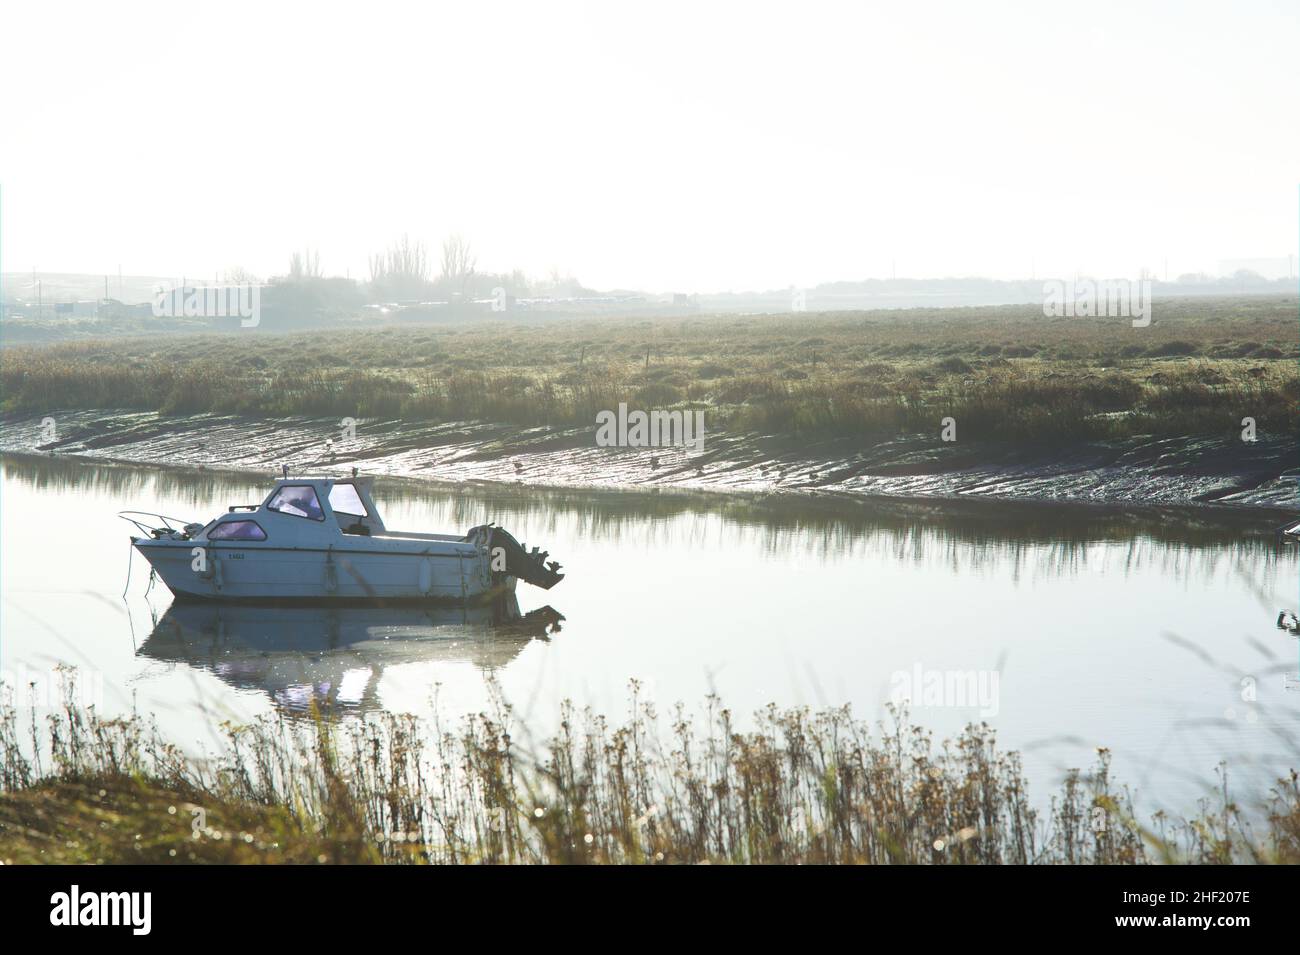 Britain, Essex Landscapes - A motorboat moored at Pitsea Creek on a misty winter morning. Stock Photo